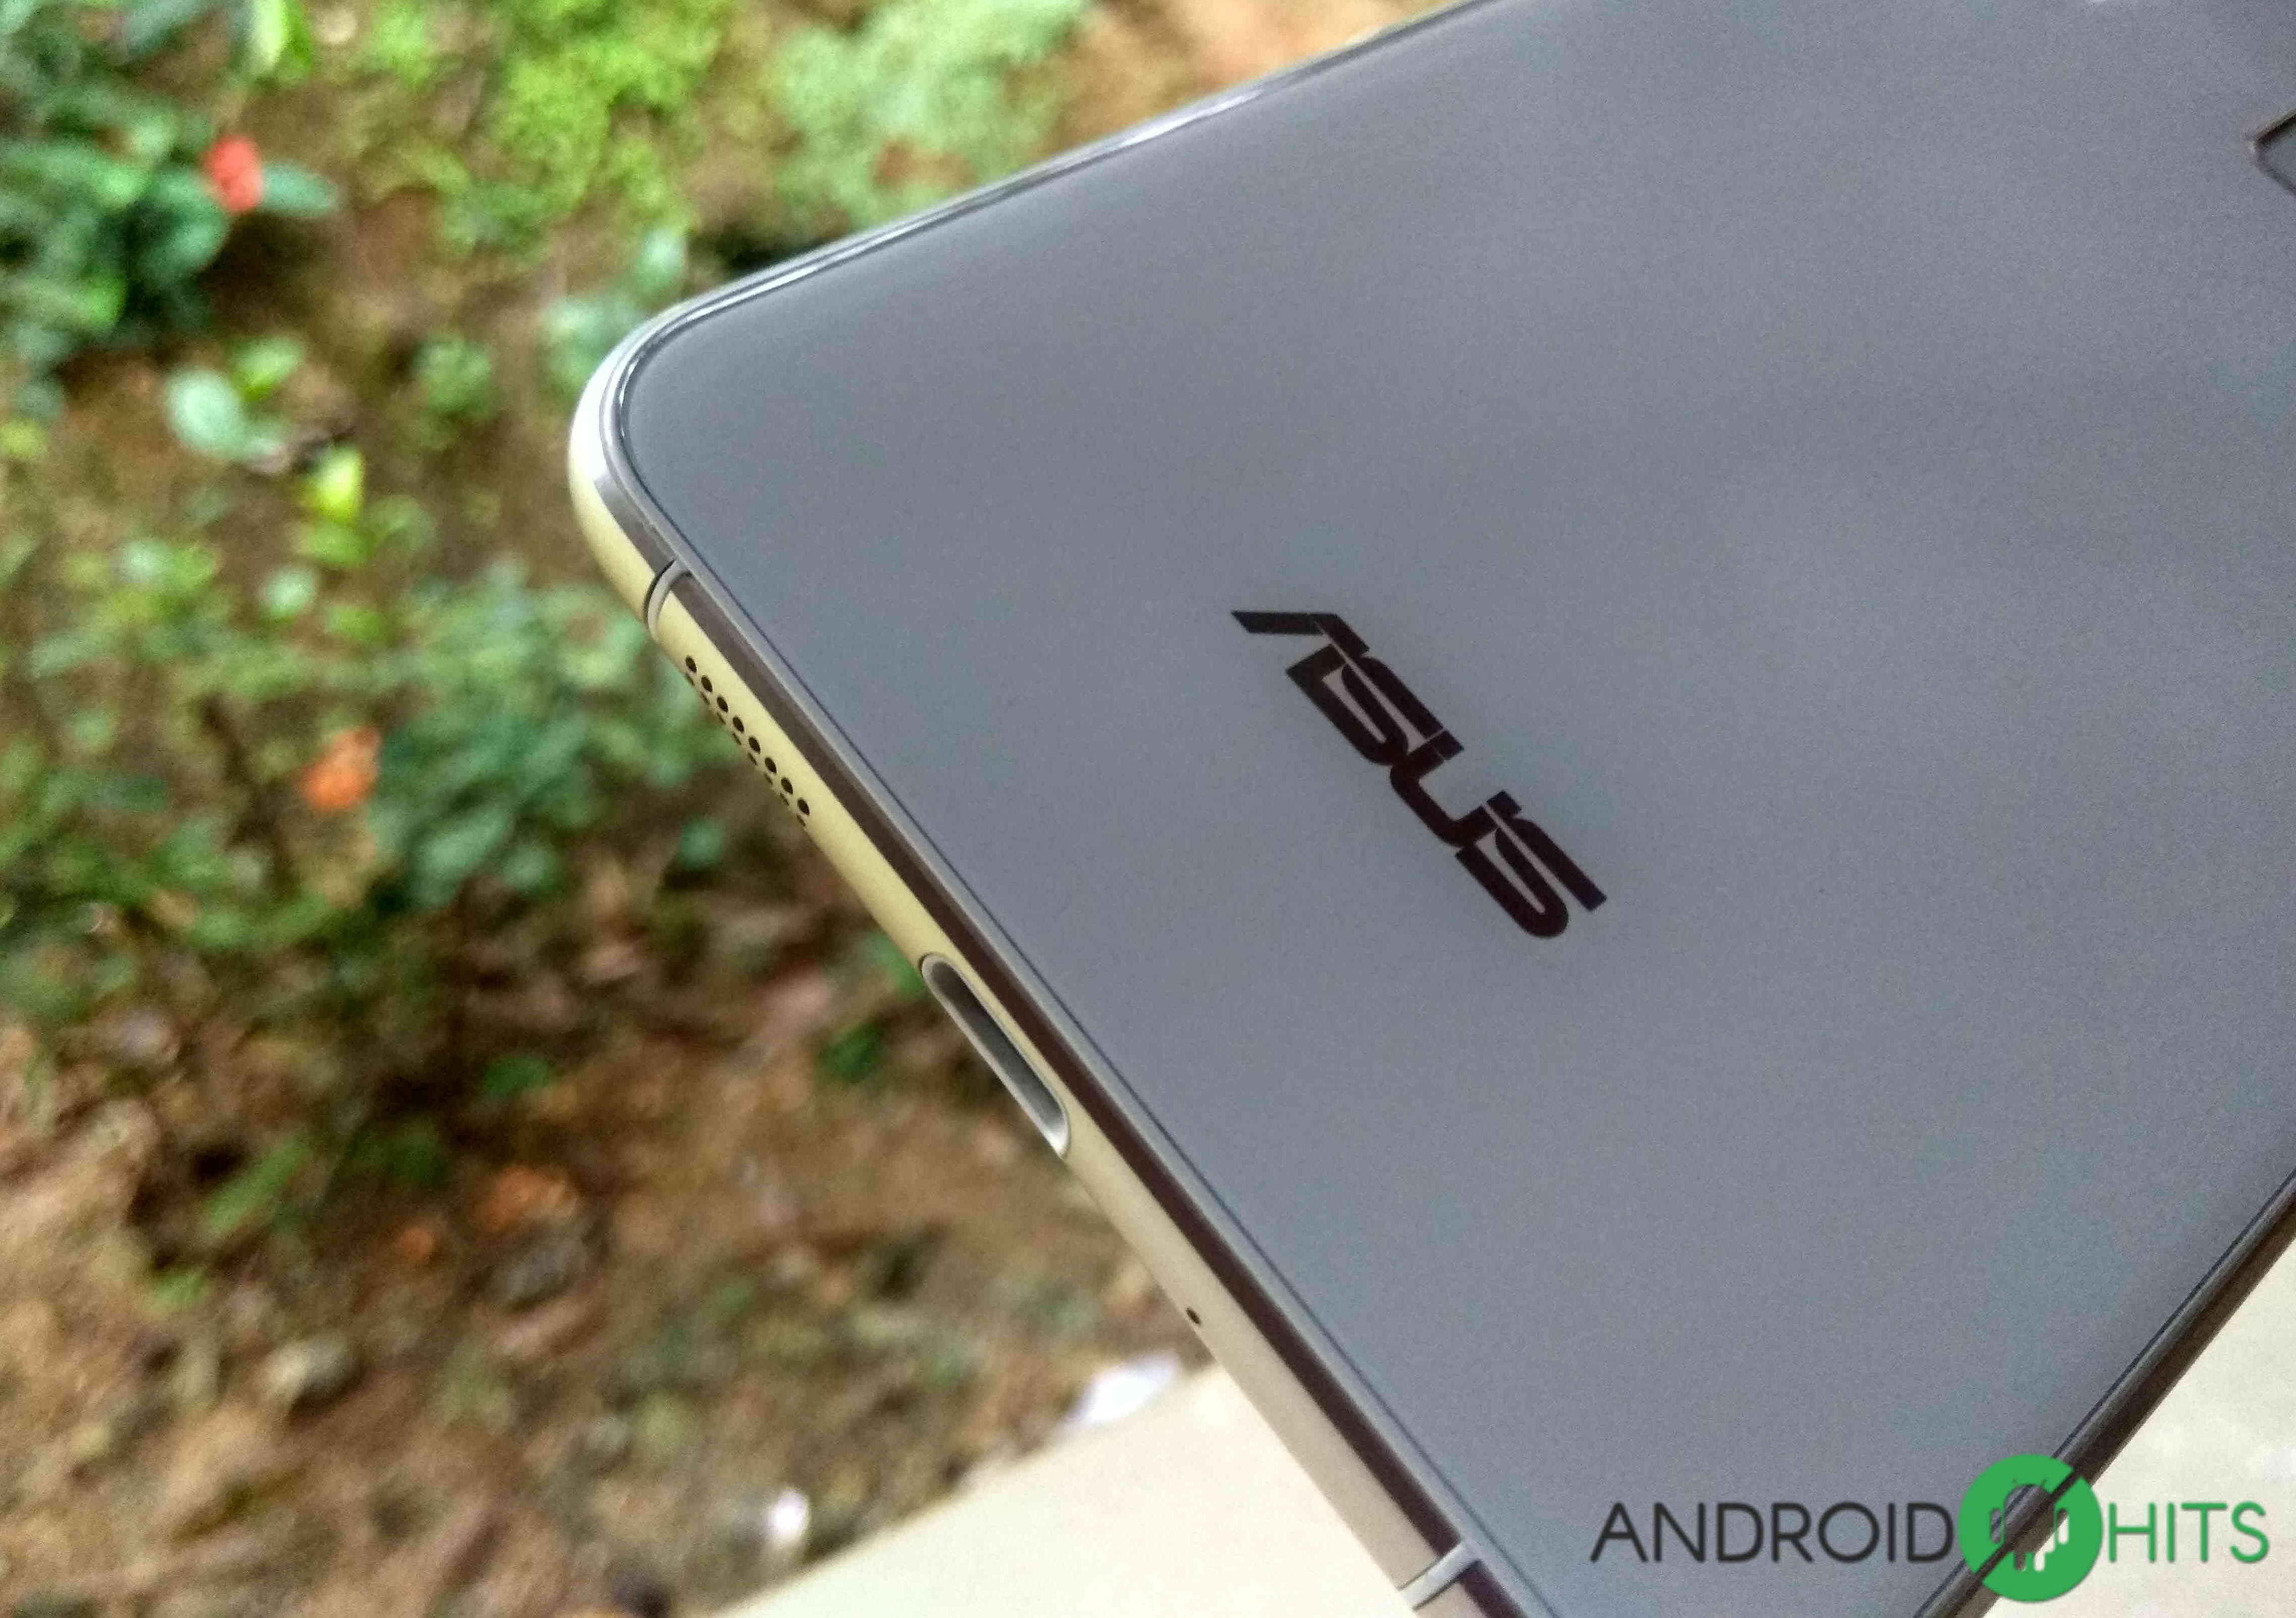 Asus to unveil Zenfone 4 series by July 1